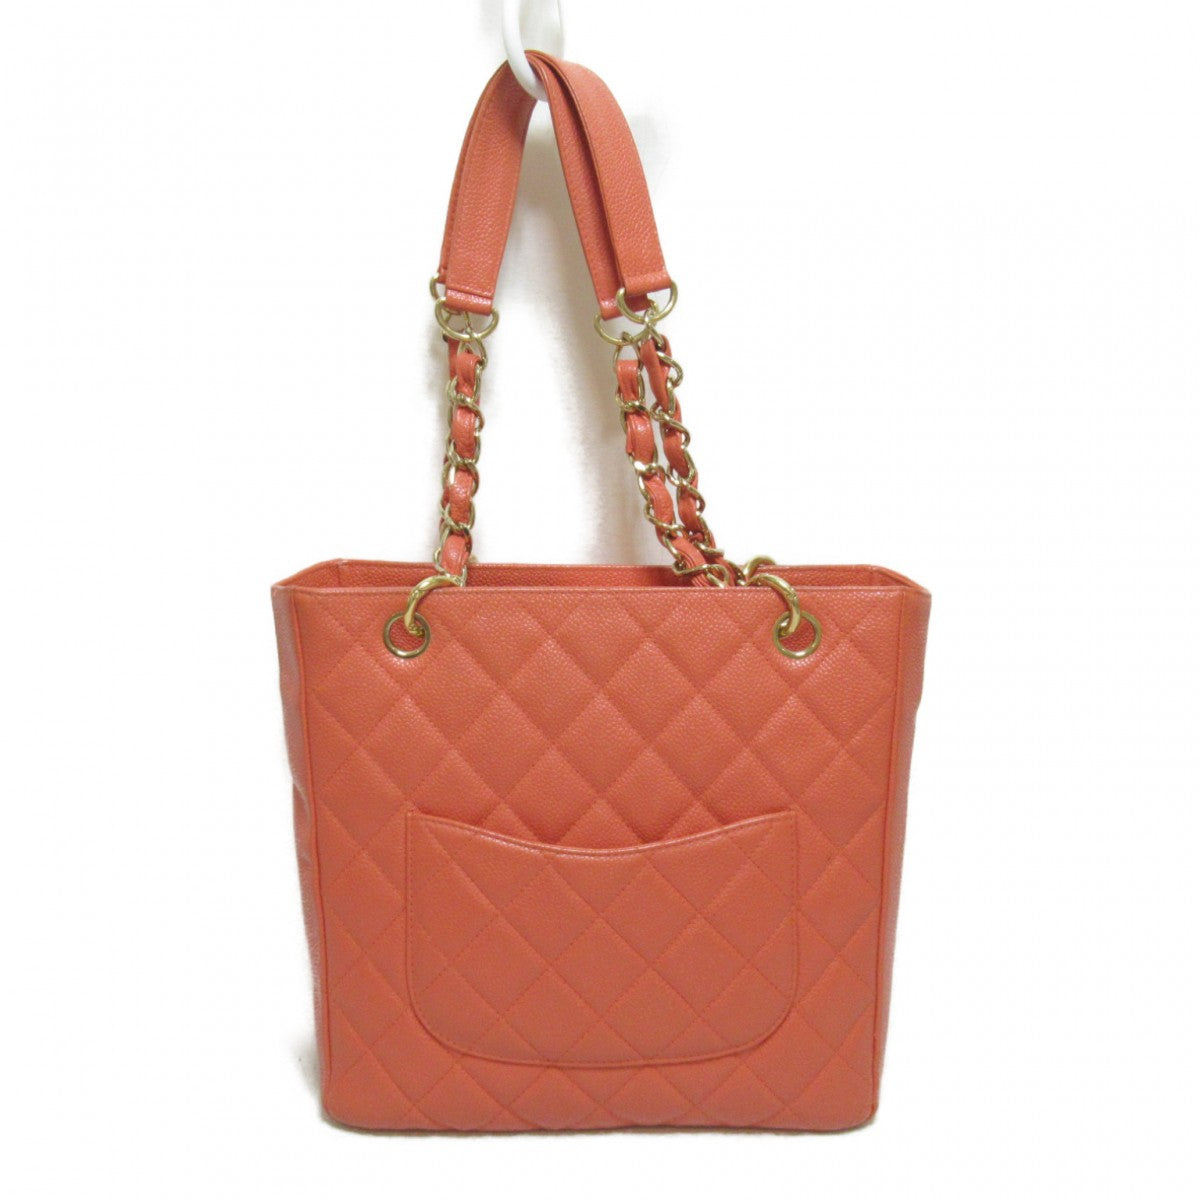 CC Quilted Caviar Petite Shopping Tote